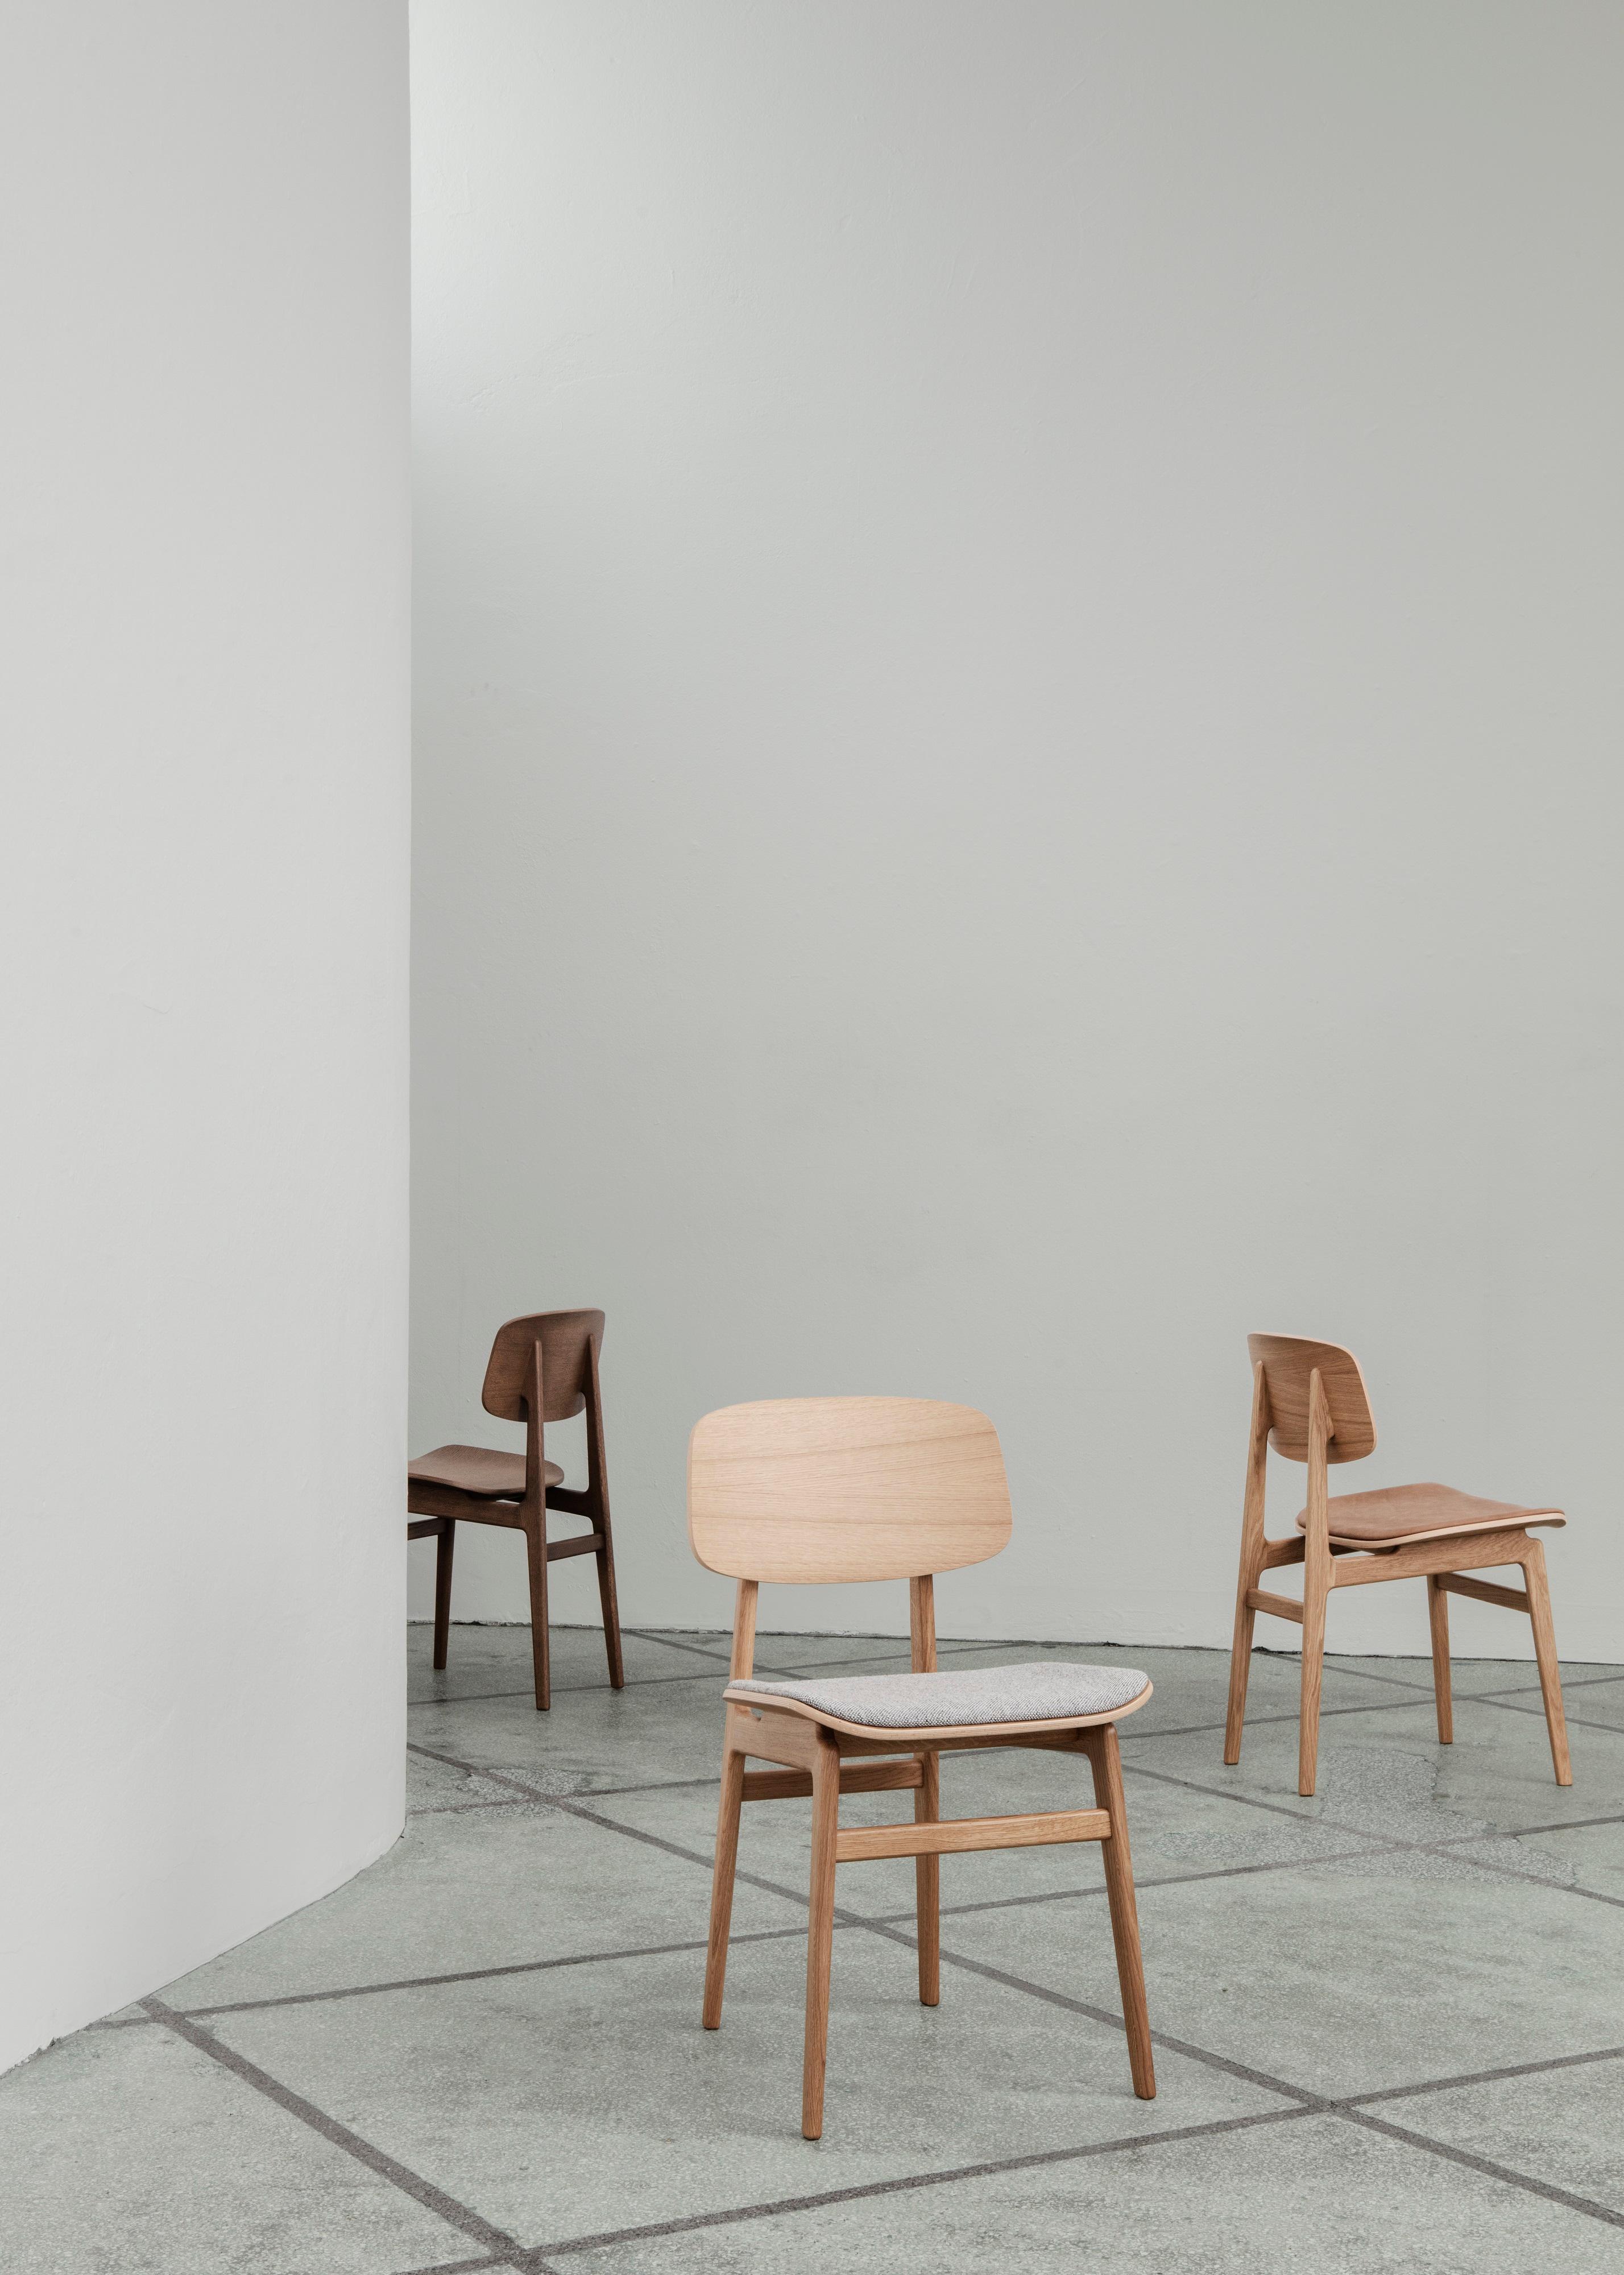 NY11 Chair by NORR11
Dimensions: D 52 x W 45,5 x H 78 cm. SH 45,5 cm / SH w. upholstery 46,5 cm.
Materials: Natural oak and upholstery.
Upholstery: Canvas 926.

Available in different oak finishes: Natural oak, light smoked oak, dark smoked oak,